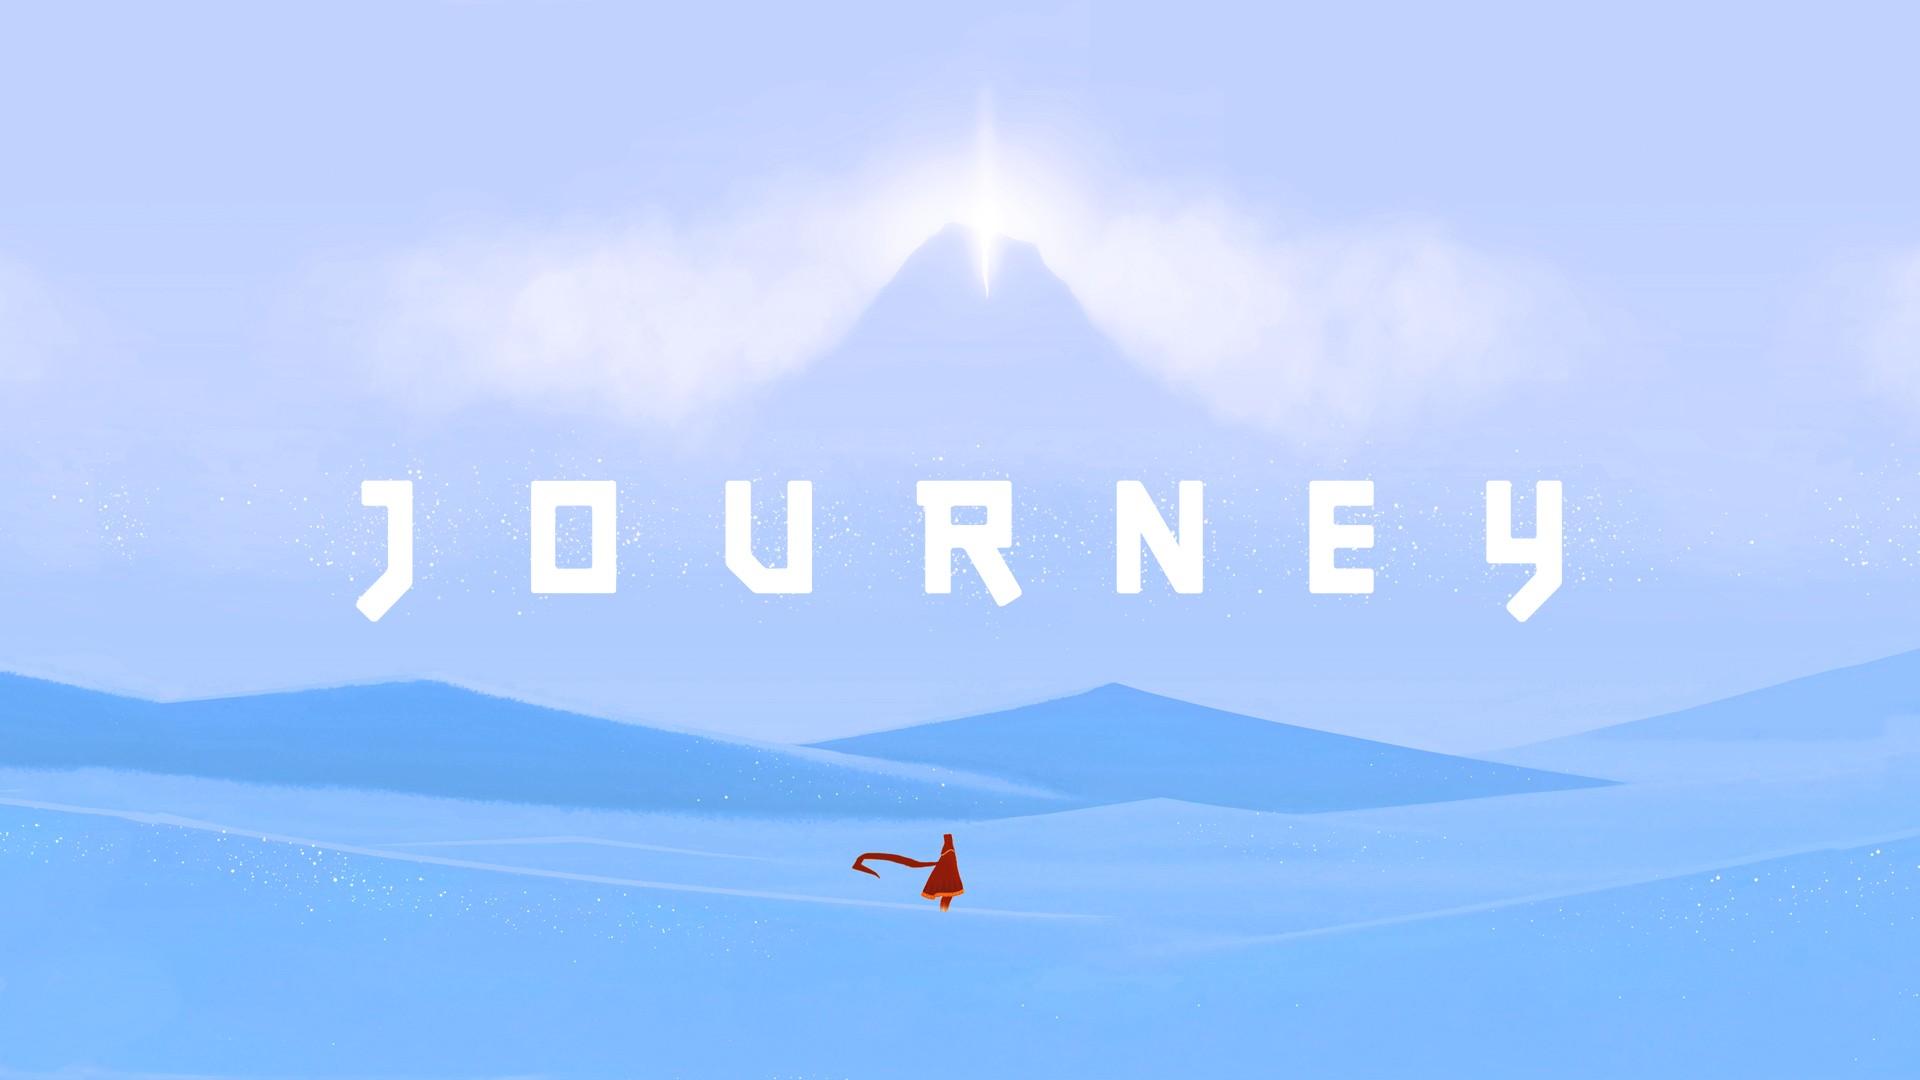 Wallpaper, 1920x1080 px, Journey game 1920x1080